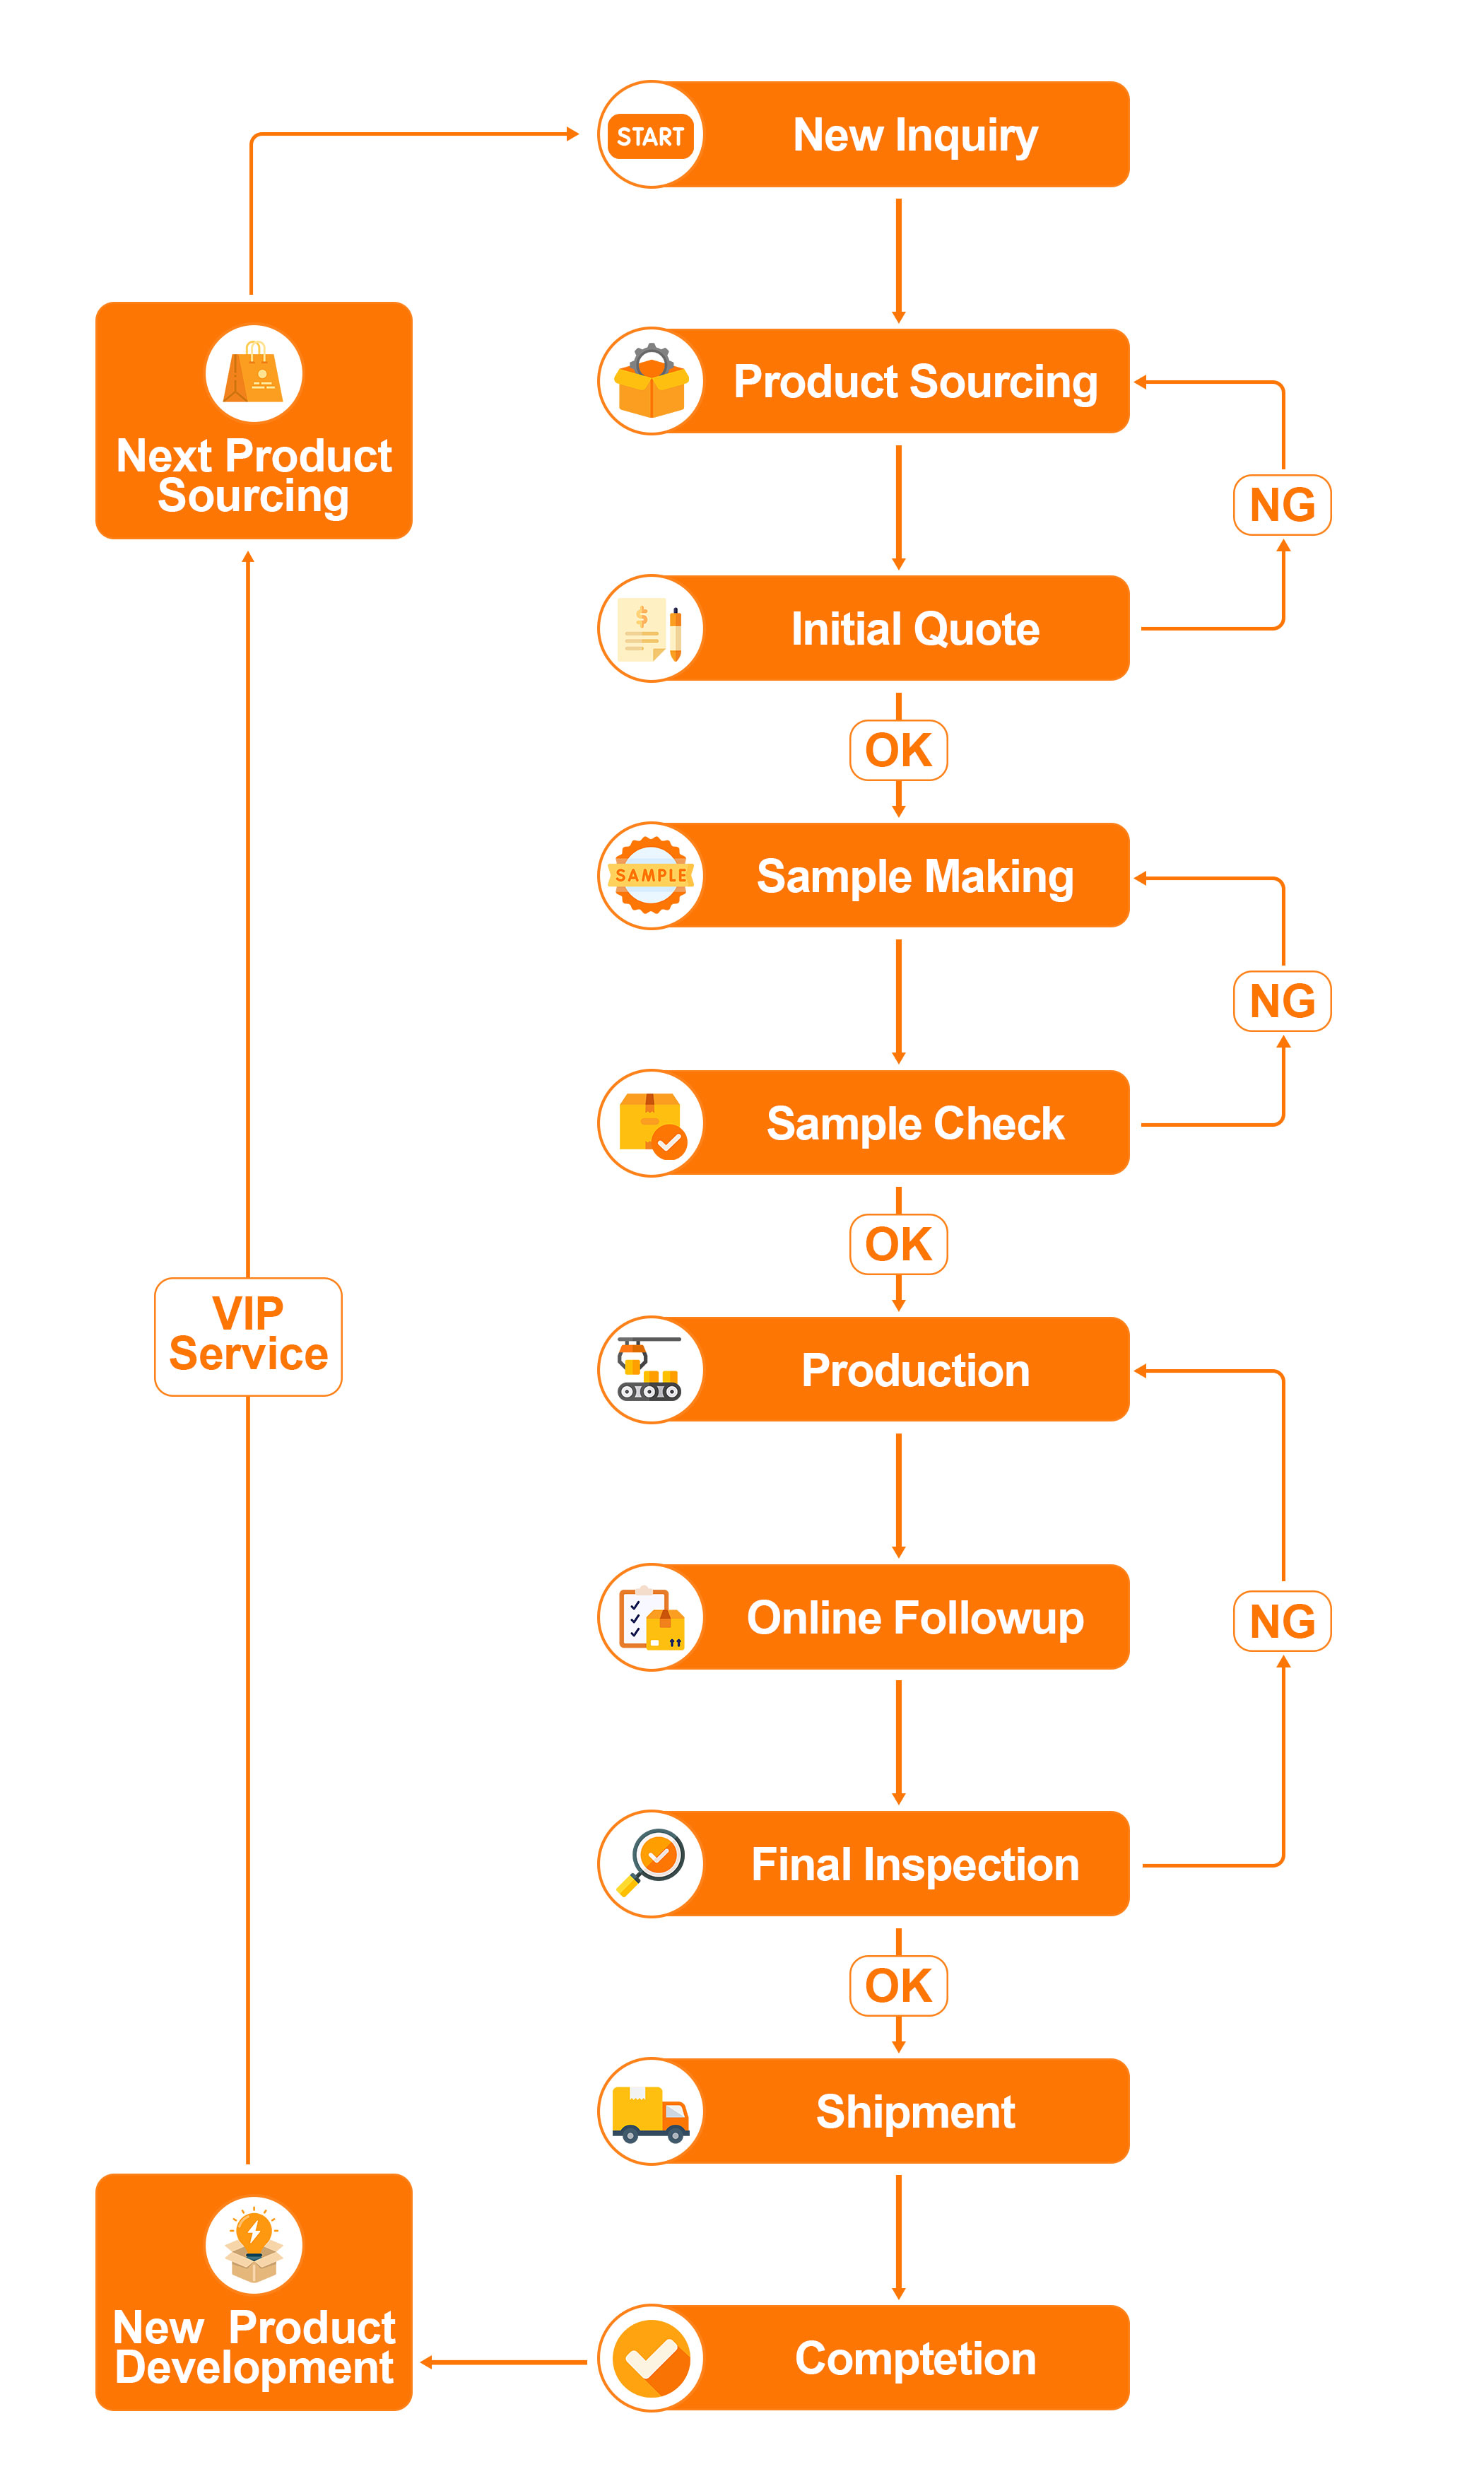 How Maple Sourcing Service Works